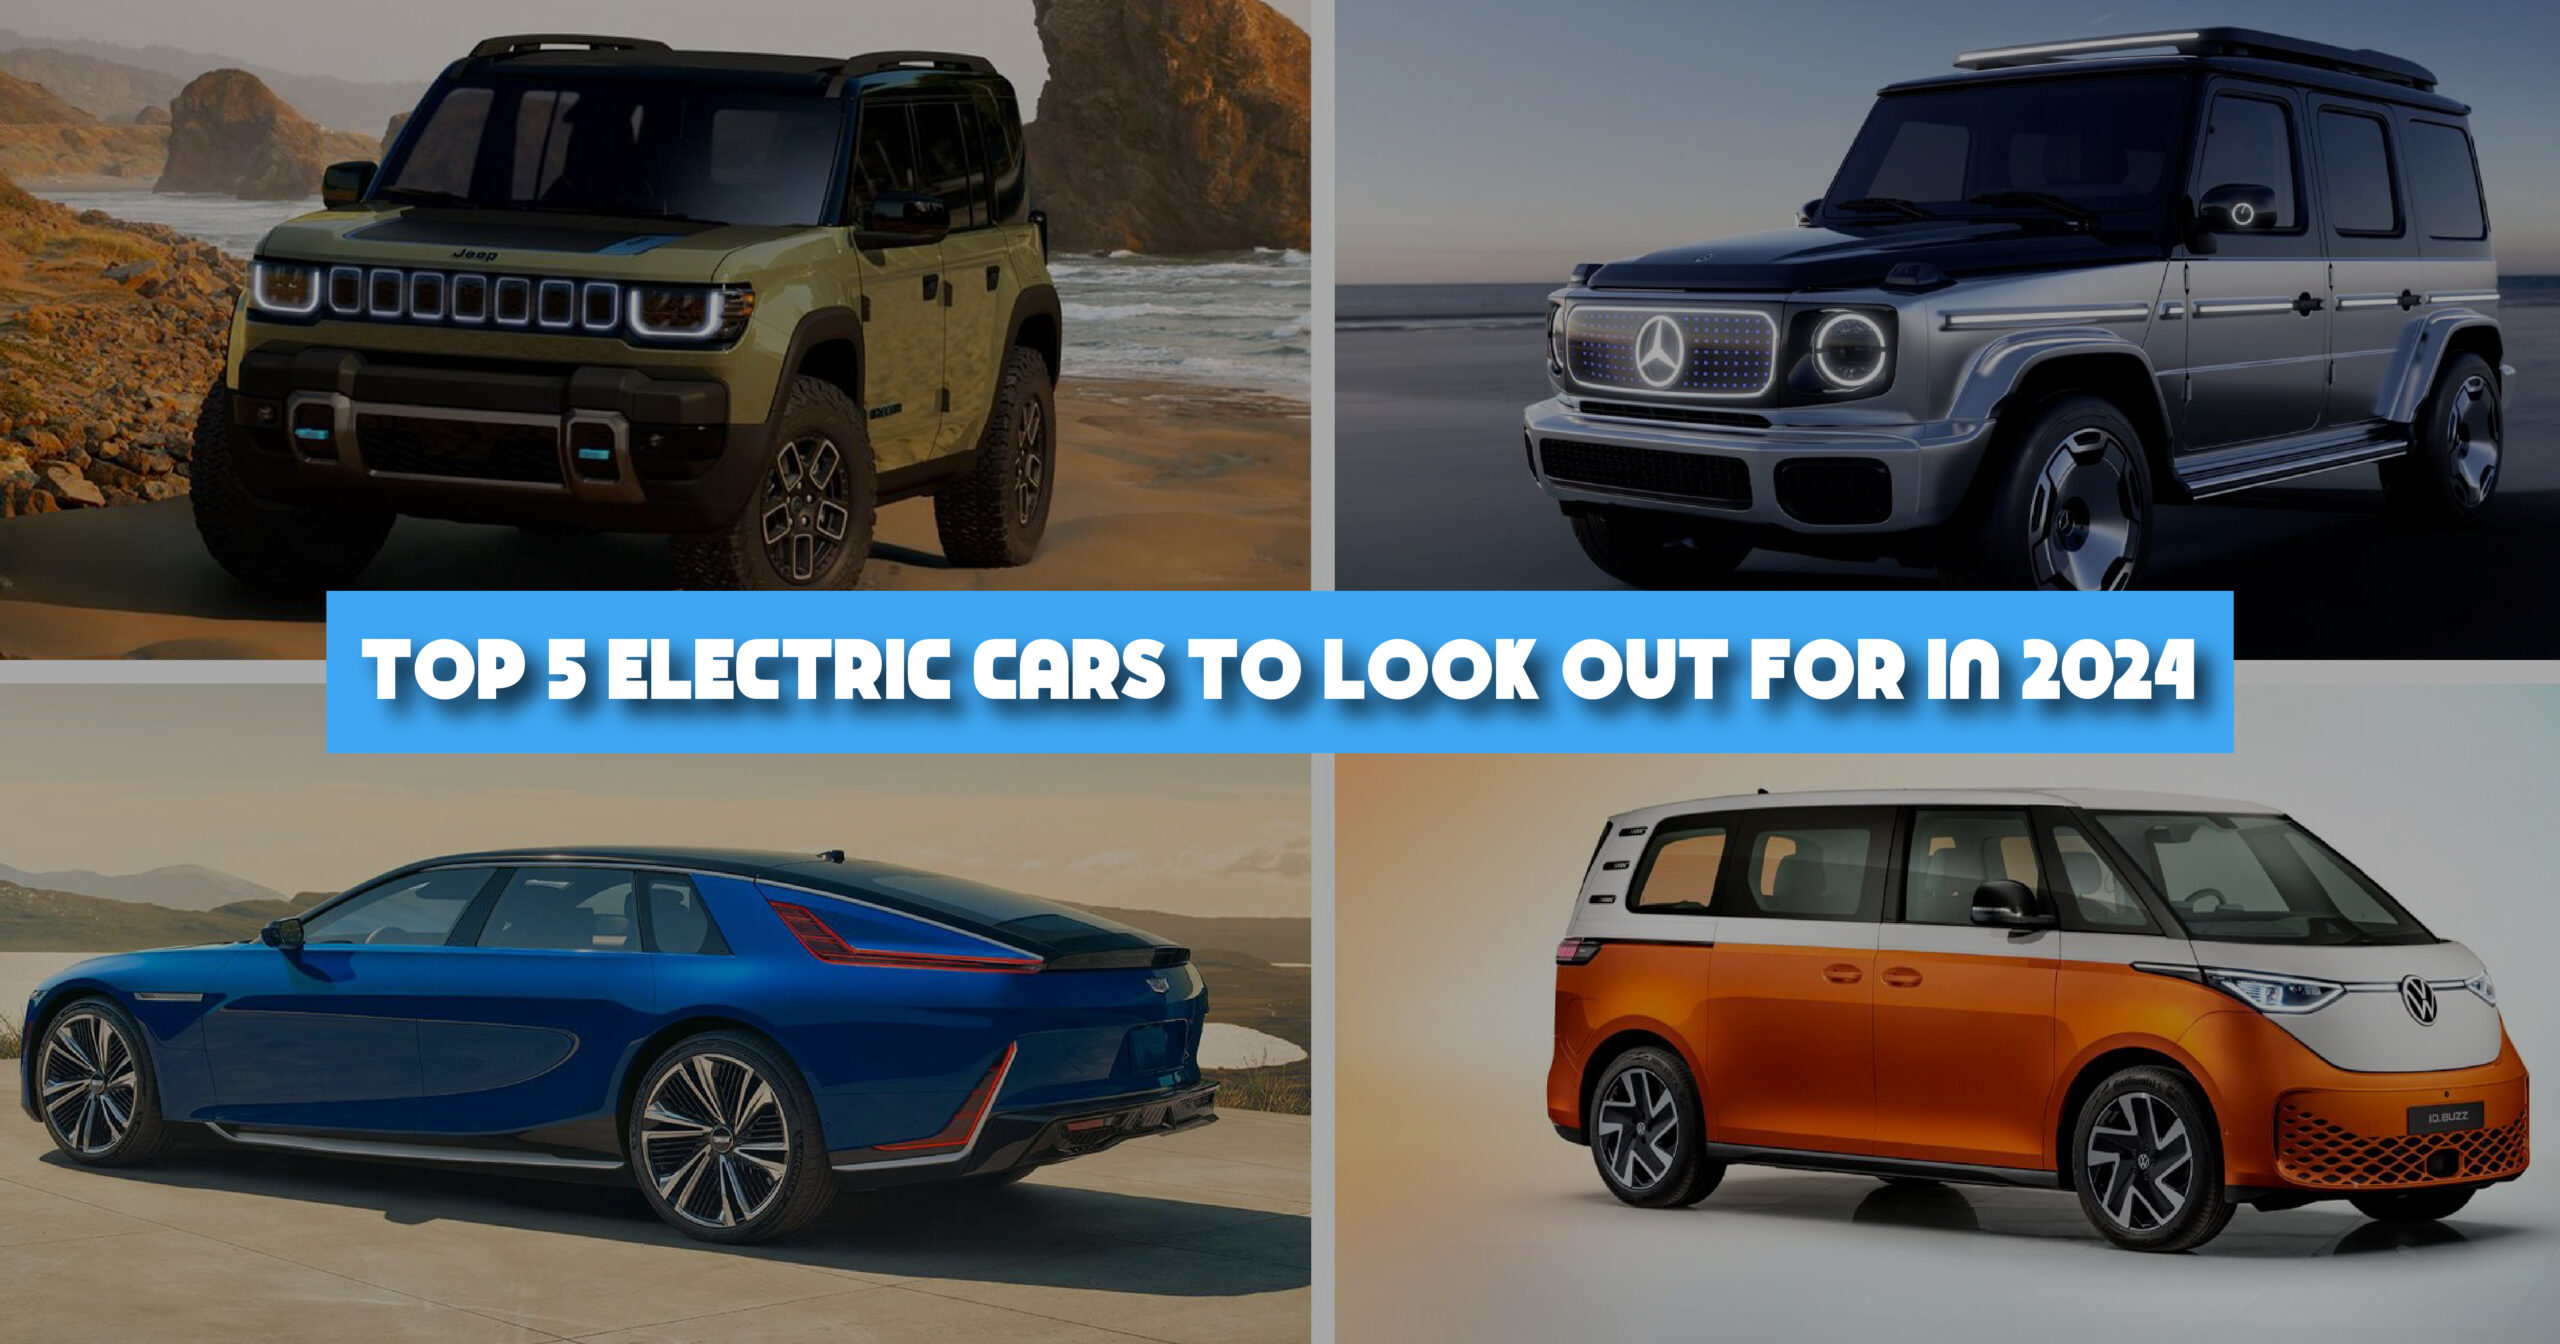 Top 5 Electric Cars To Look Out For In 2024 US iDesk